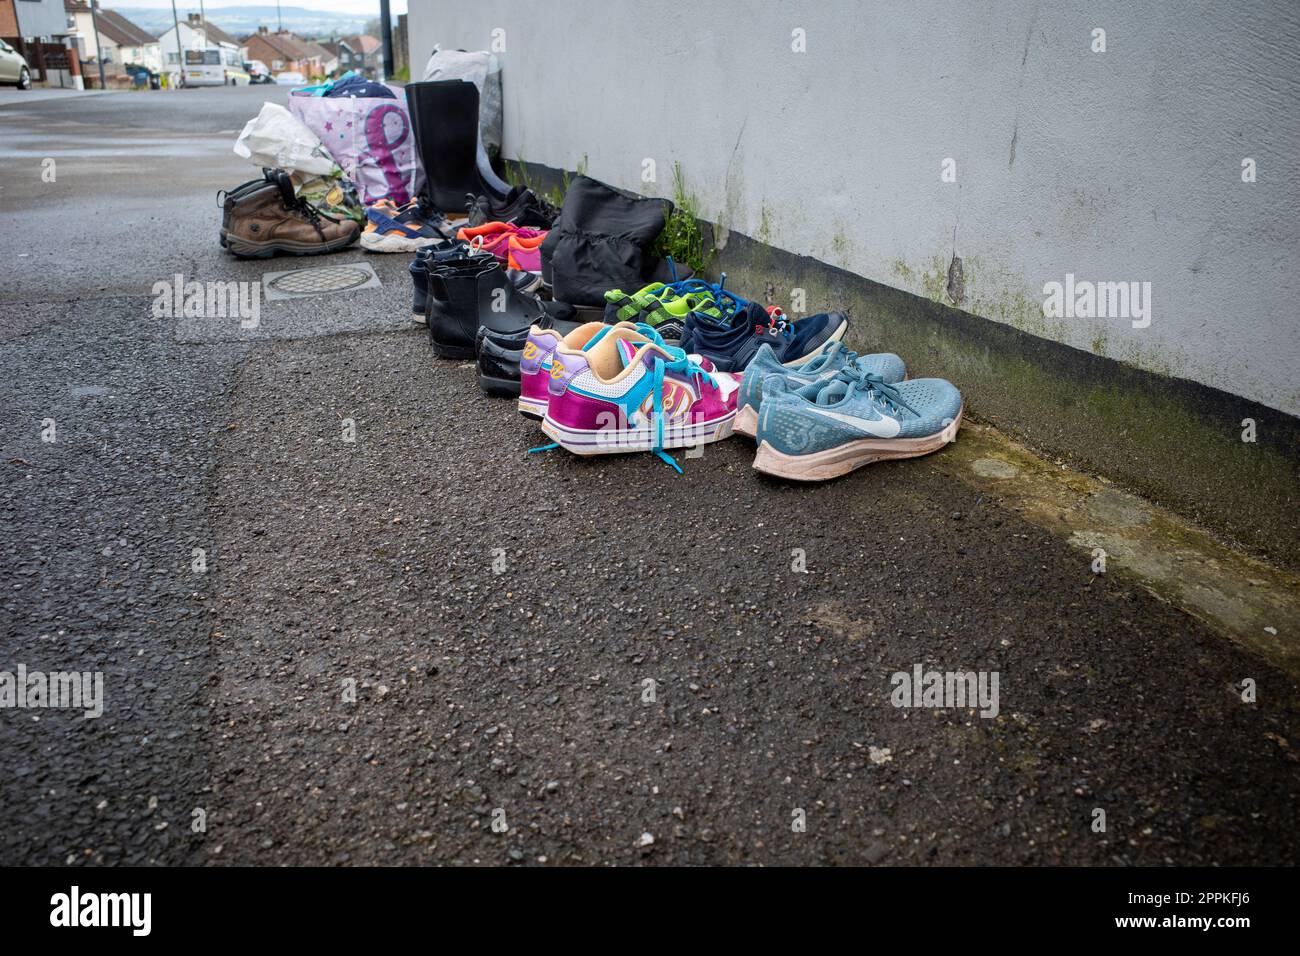 A select of trainers, shoes and boots left outside for recycling Stock Photo